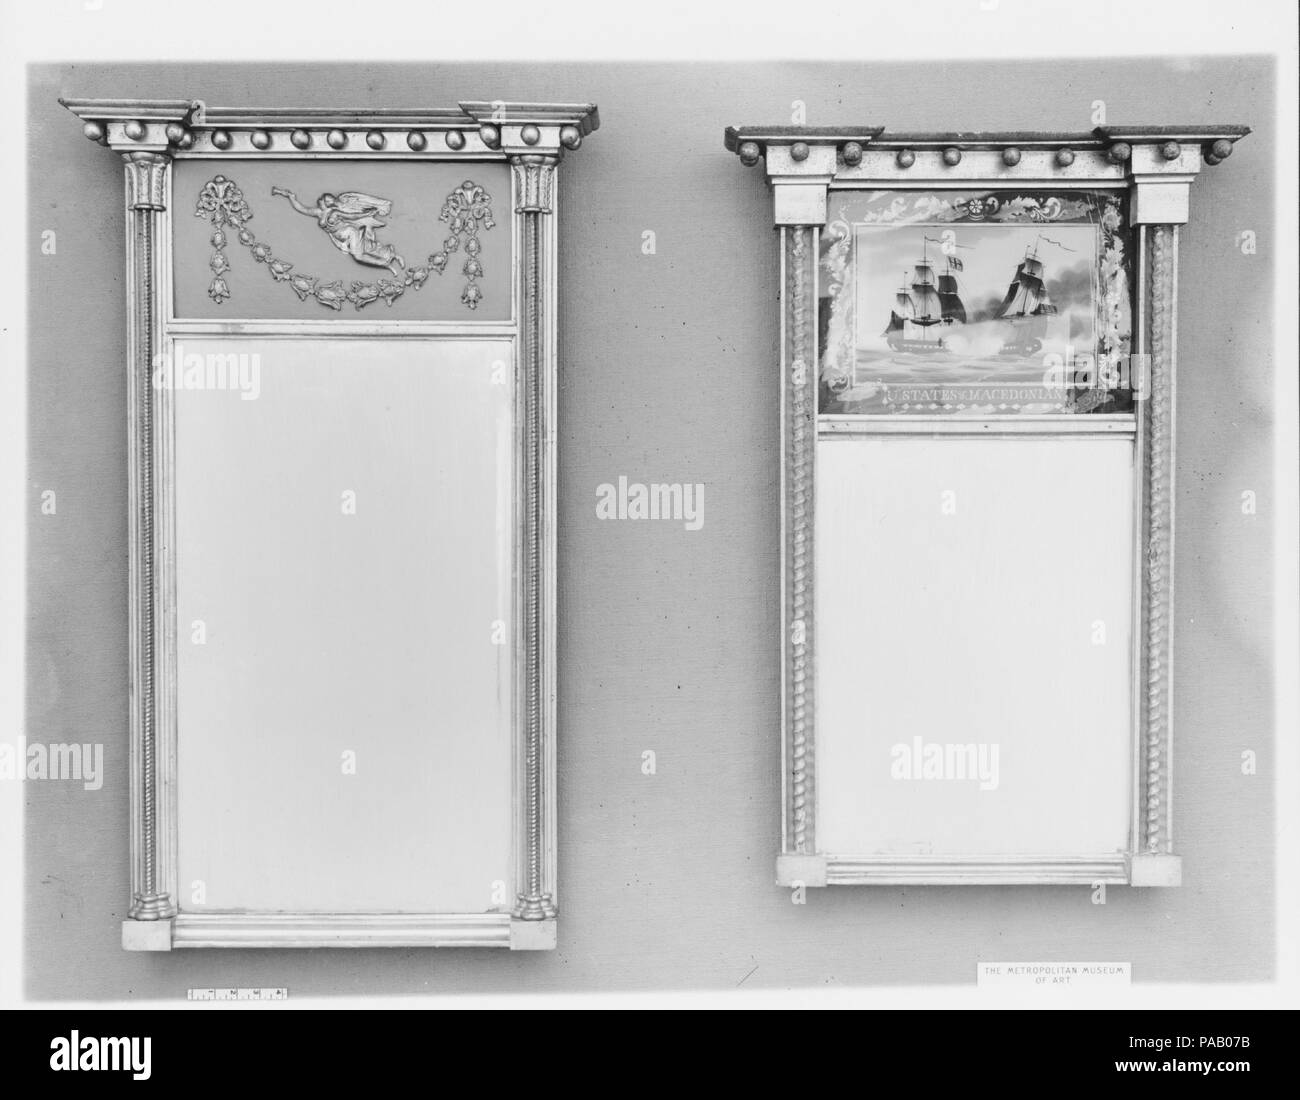 Looking Glass. Dimensions: 31 1/2 x 21 3/4 in. (80 x 55.2 cm). Date: 1812-20. Museum: Metropolitan Museum of Art, New York, USA. Stock Photo